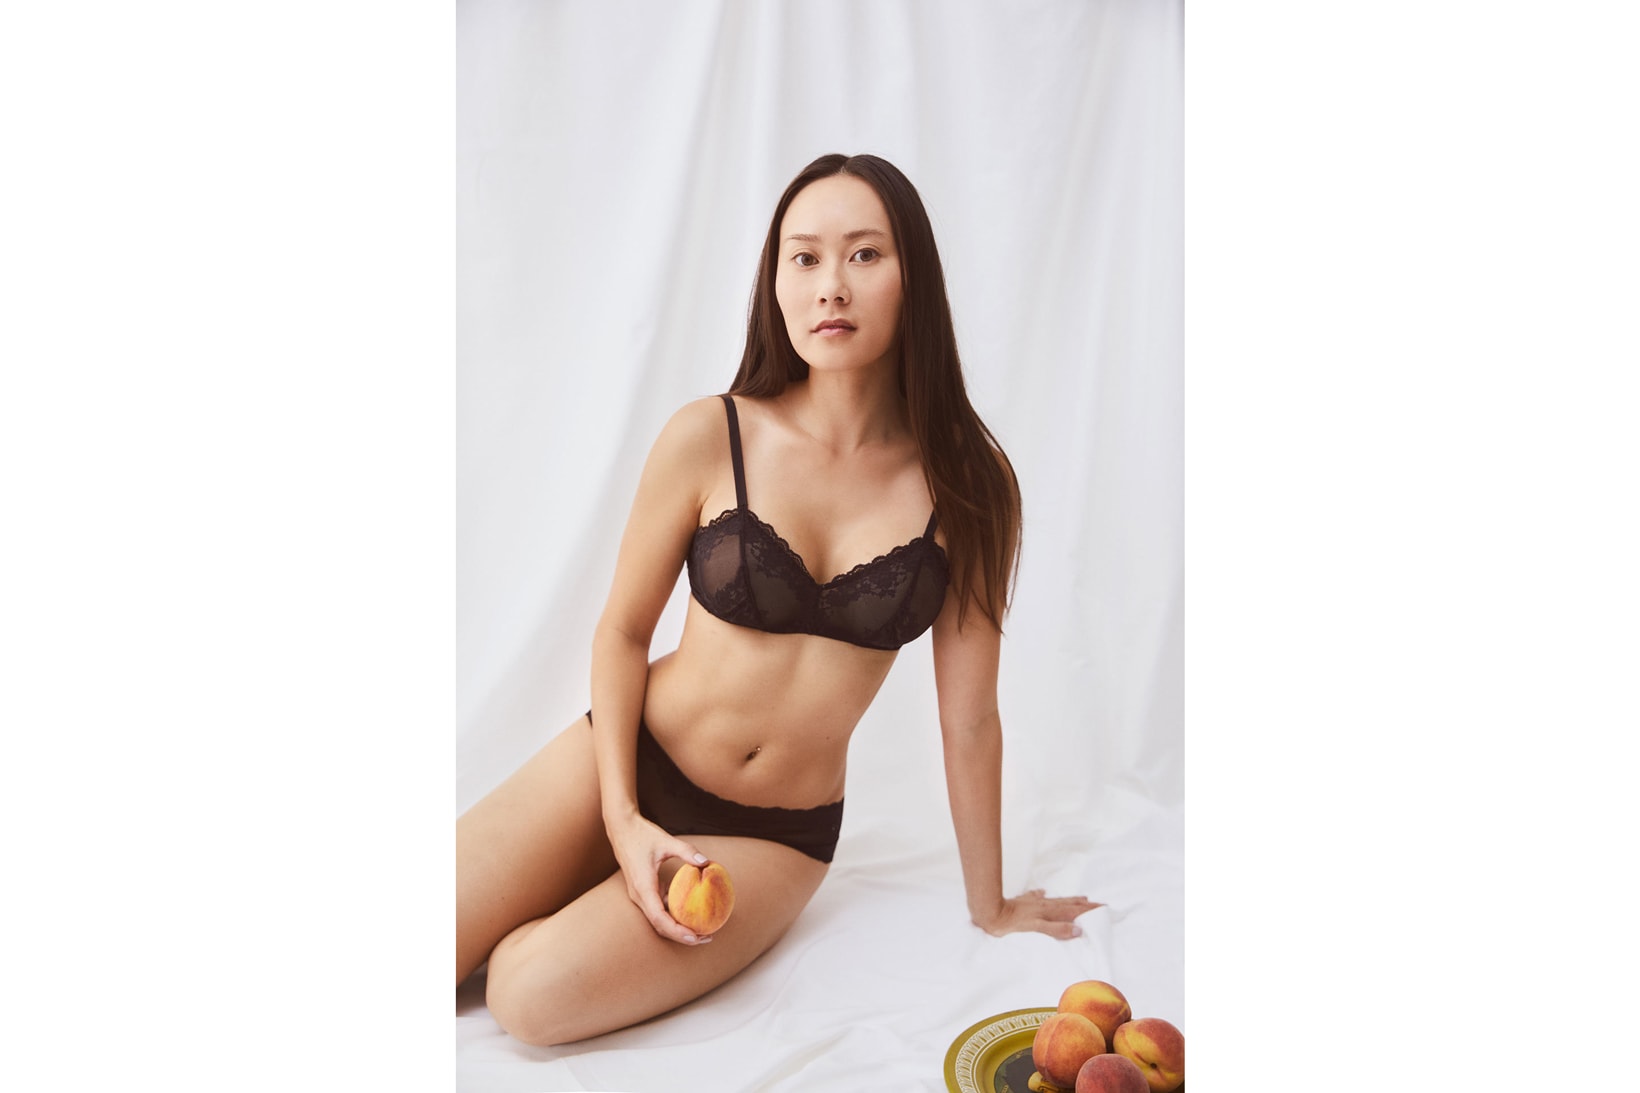 Reformation Has A Pretty New Lingerie Line